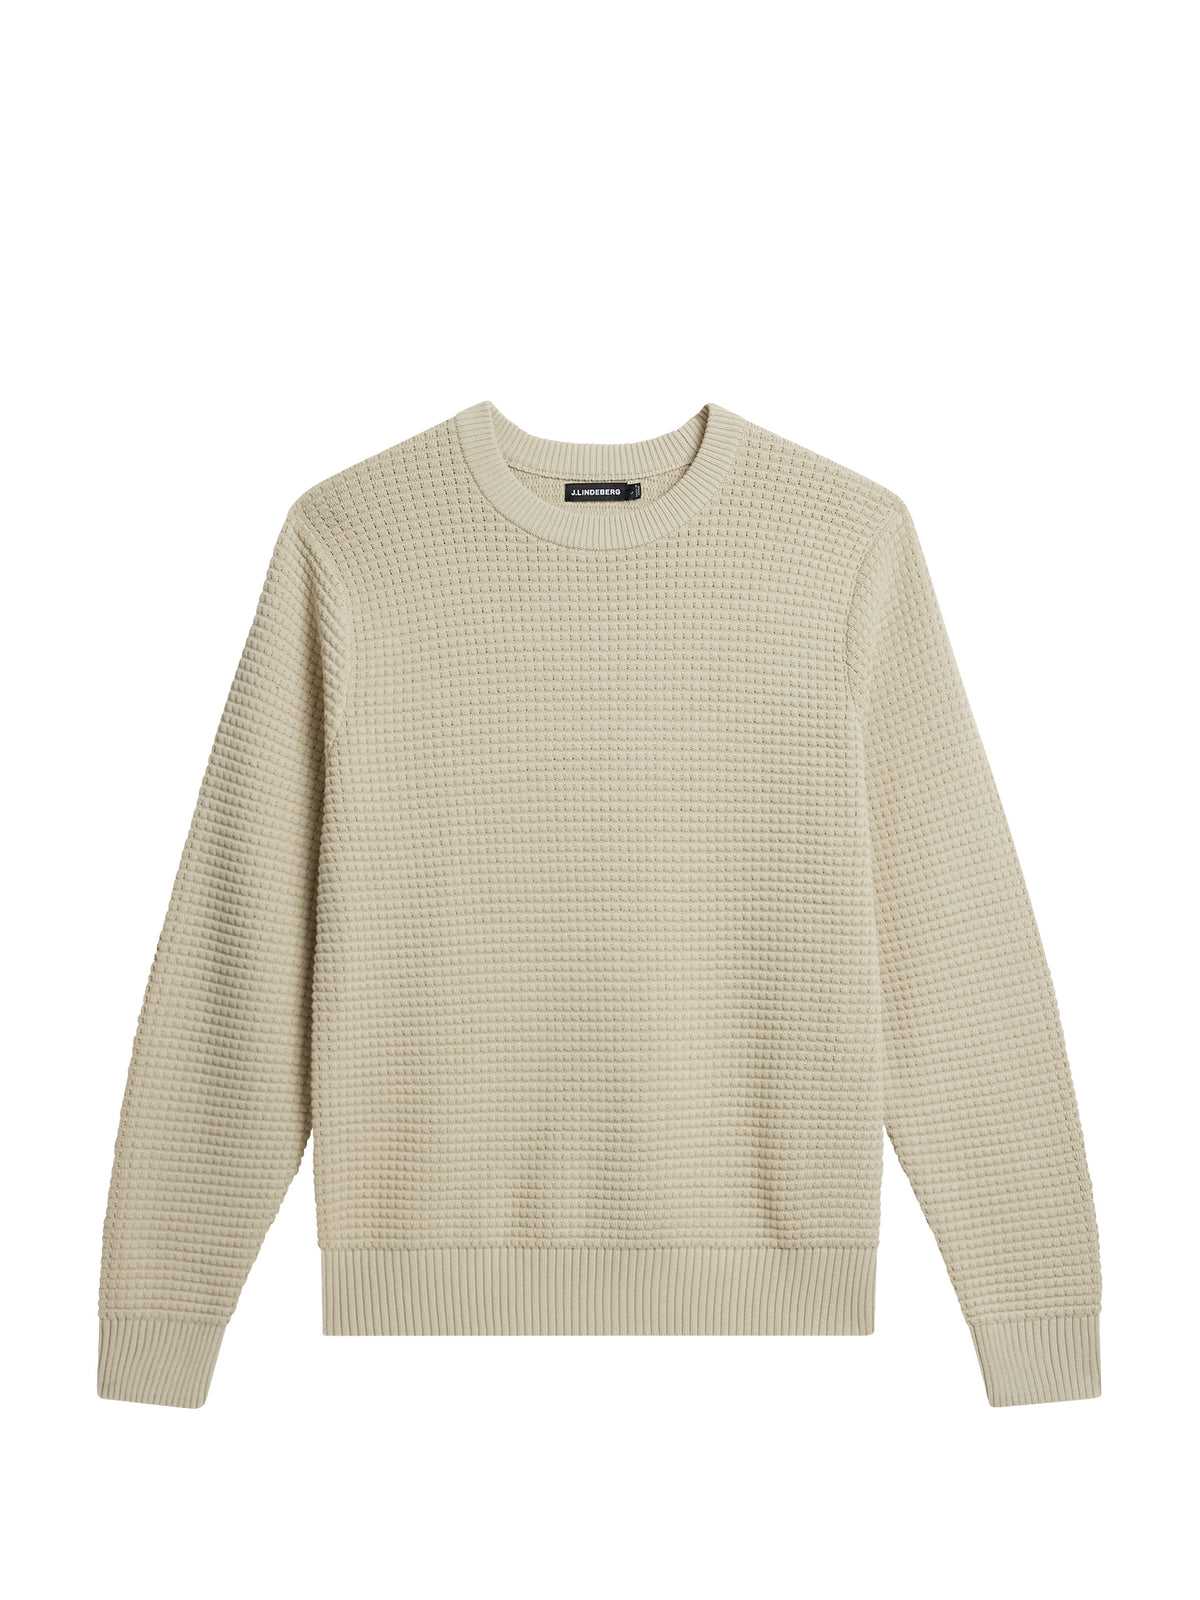 Oliver Structure Sweater / Oyster Gray – J.Lindeberg